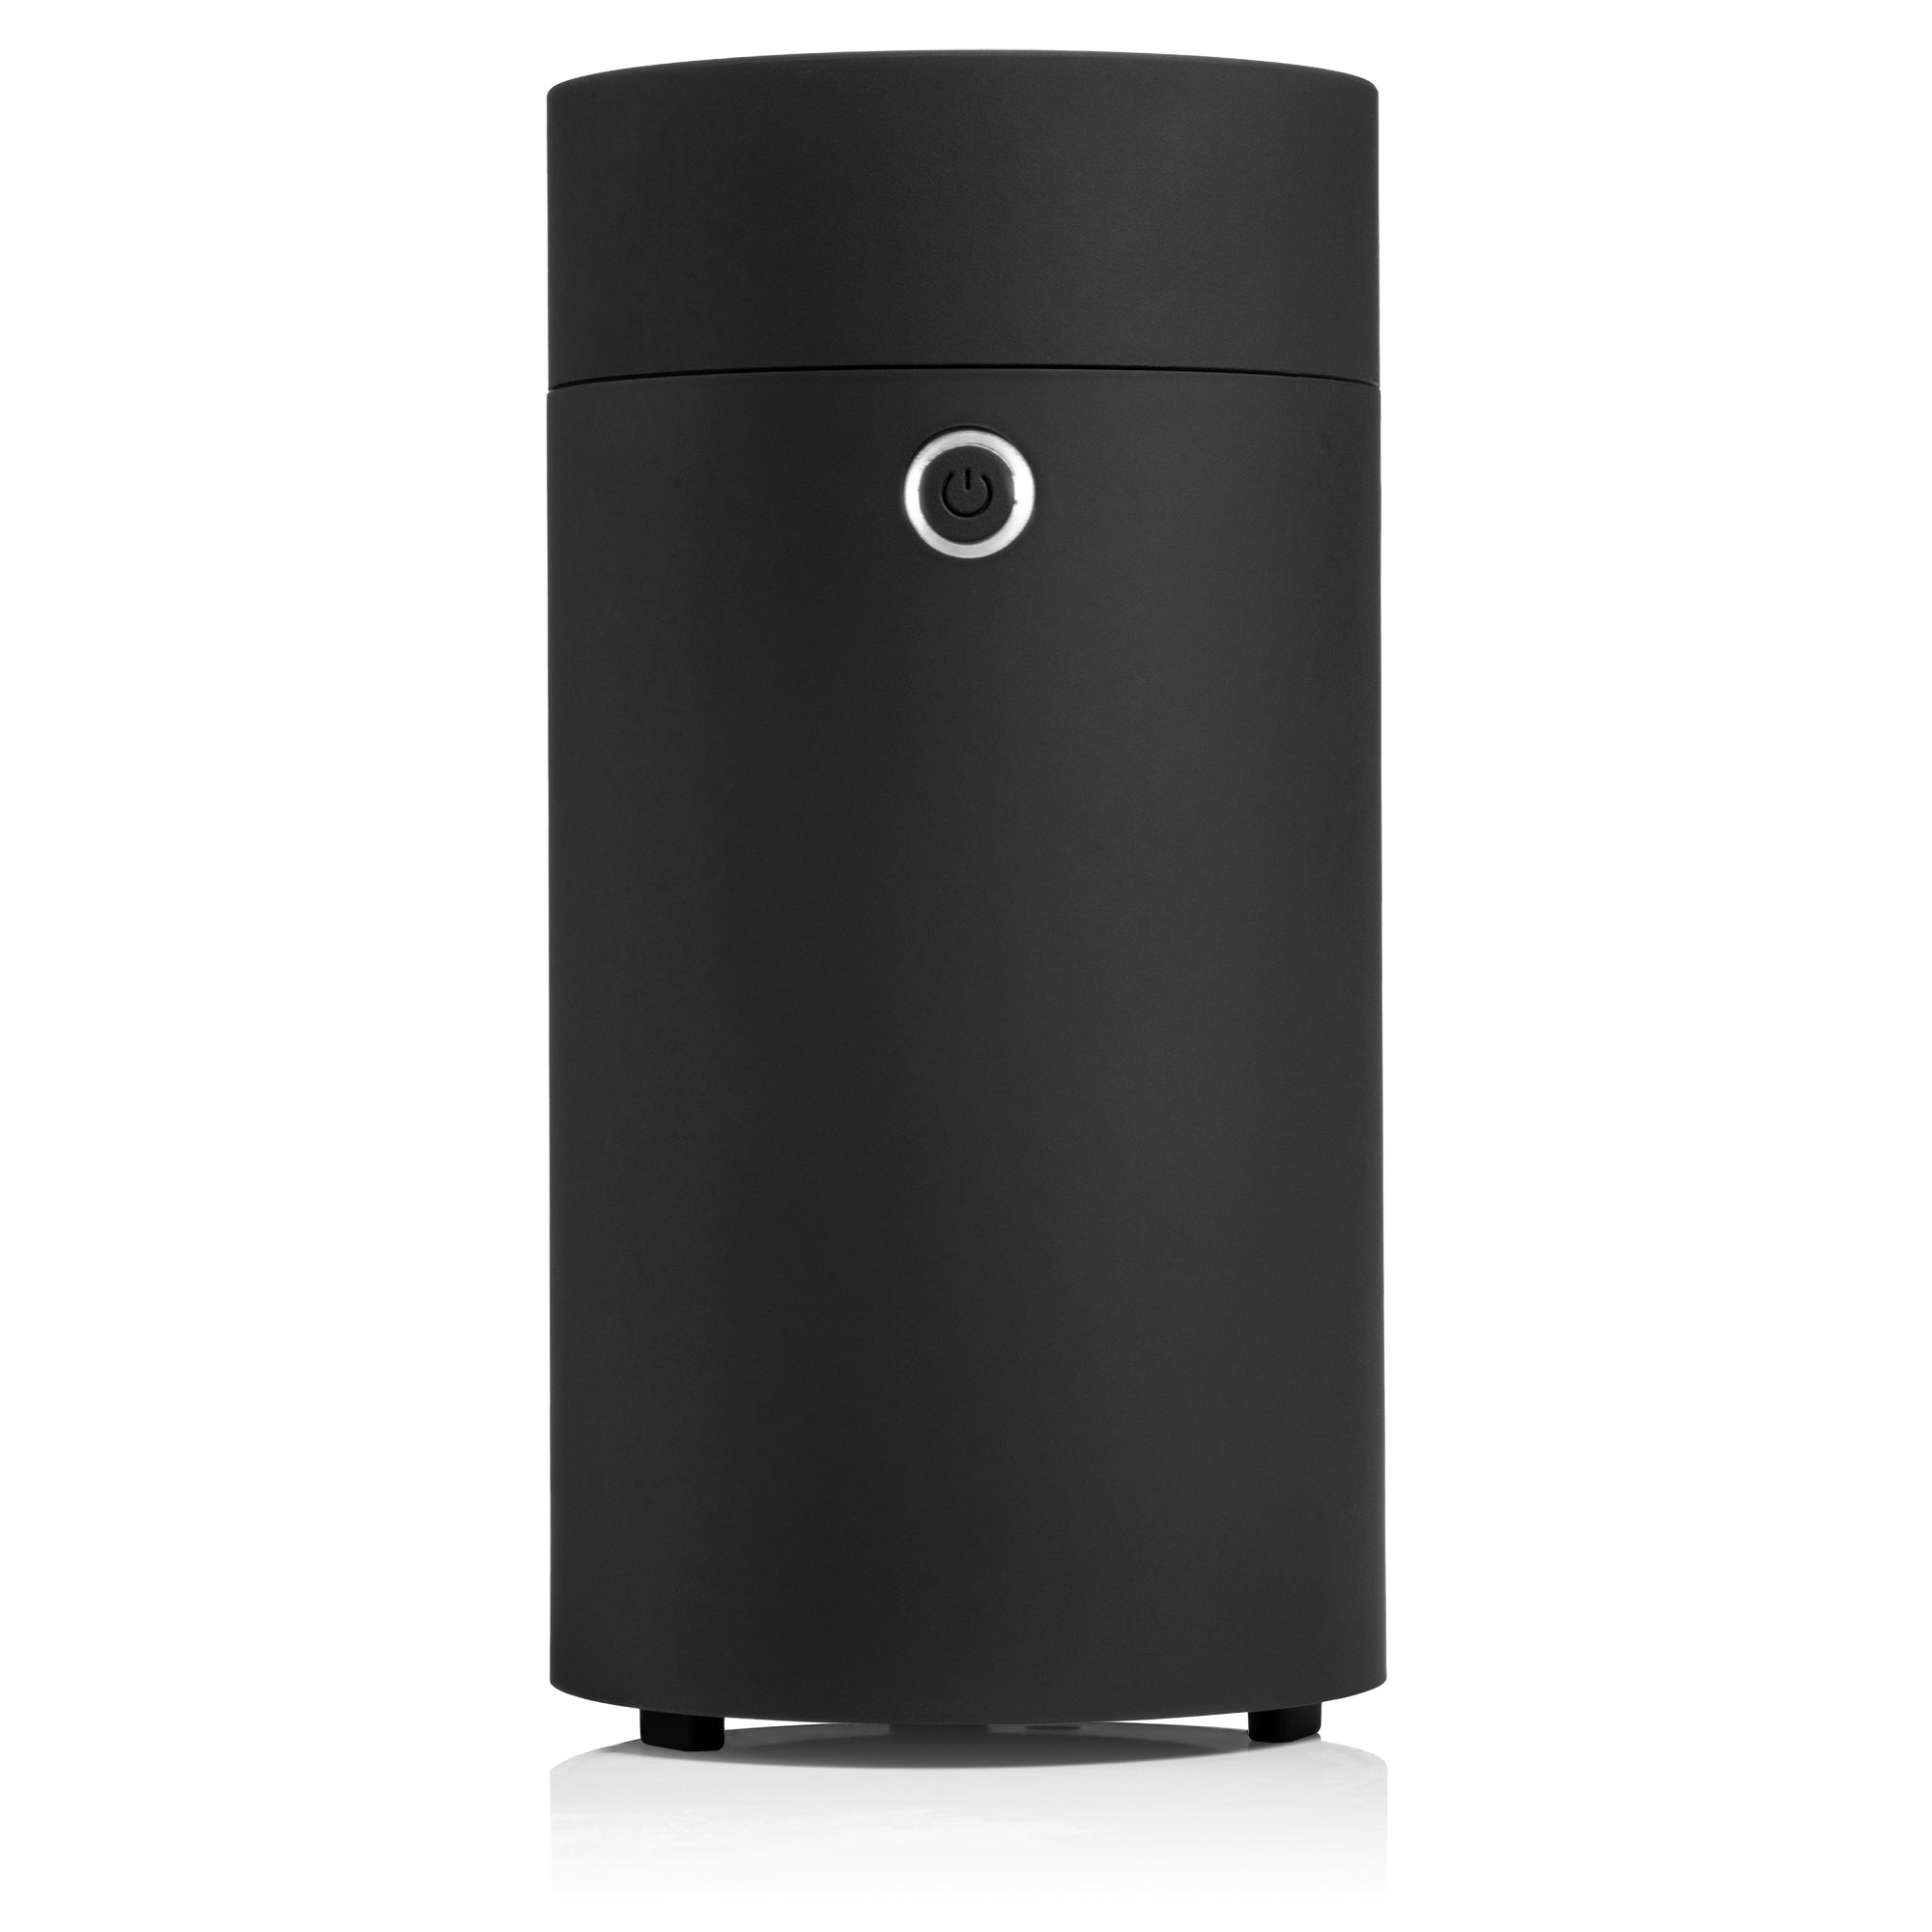 Campo Beauty Travel Ultrasonic Essential Oil Diffuser - MATTE BLACK Breathe beauty with the intention transform the mood & purify the air of any space on the go with this jet-set USB-powered diffuser that streams 100% natural essential oil mist. This sleek, matte black diffuser is car and hotel USB-port ready. What makes this USB-powered, take-anywhere diffuser so versatile is that it looks as sleek on your shelf at home as it does in a car cupholder. 